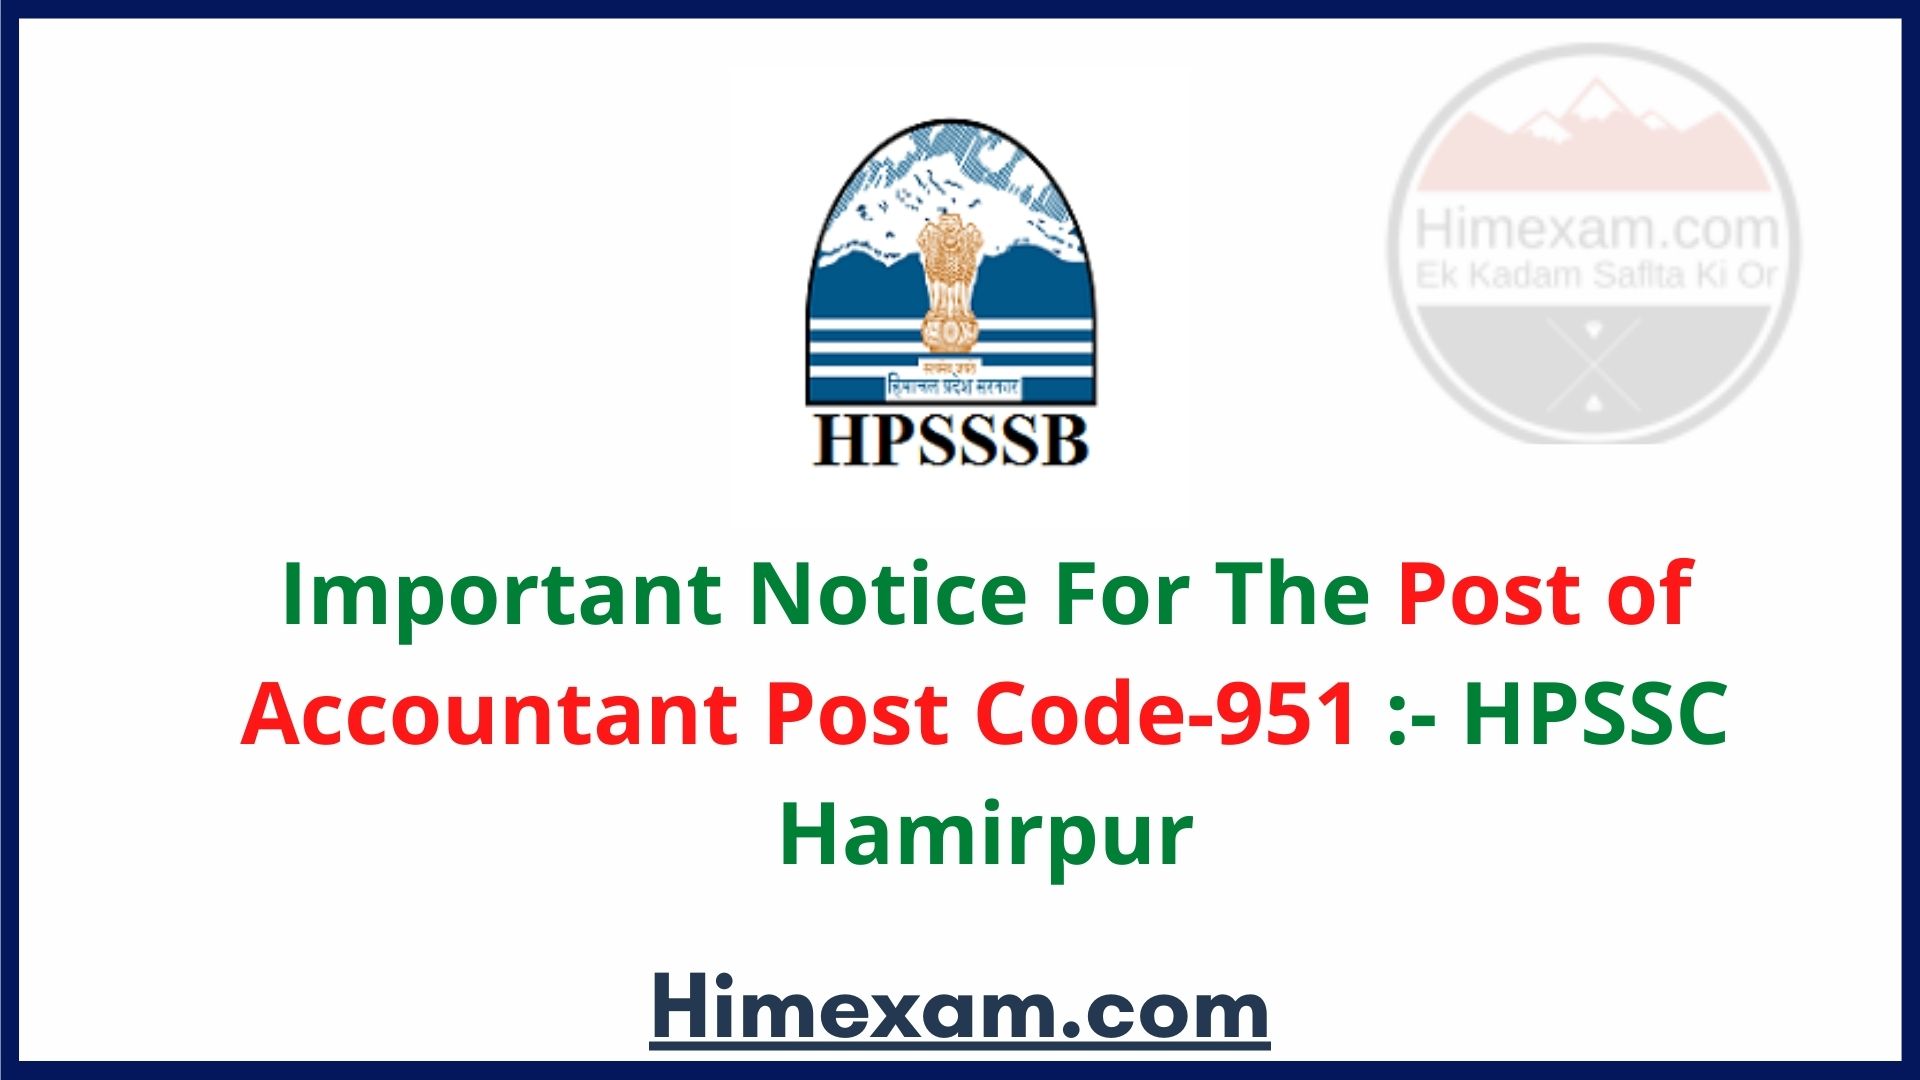 Important Notice For The Post of Accountant Post Code-951 :- HPSSC Hamirpur